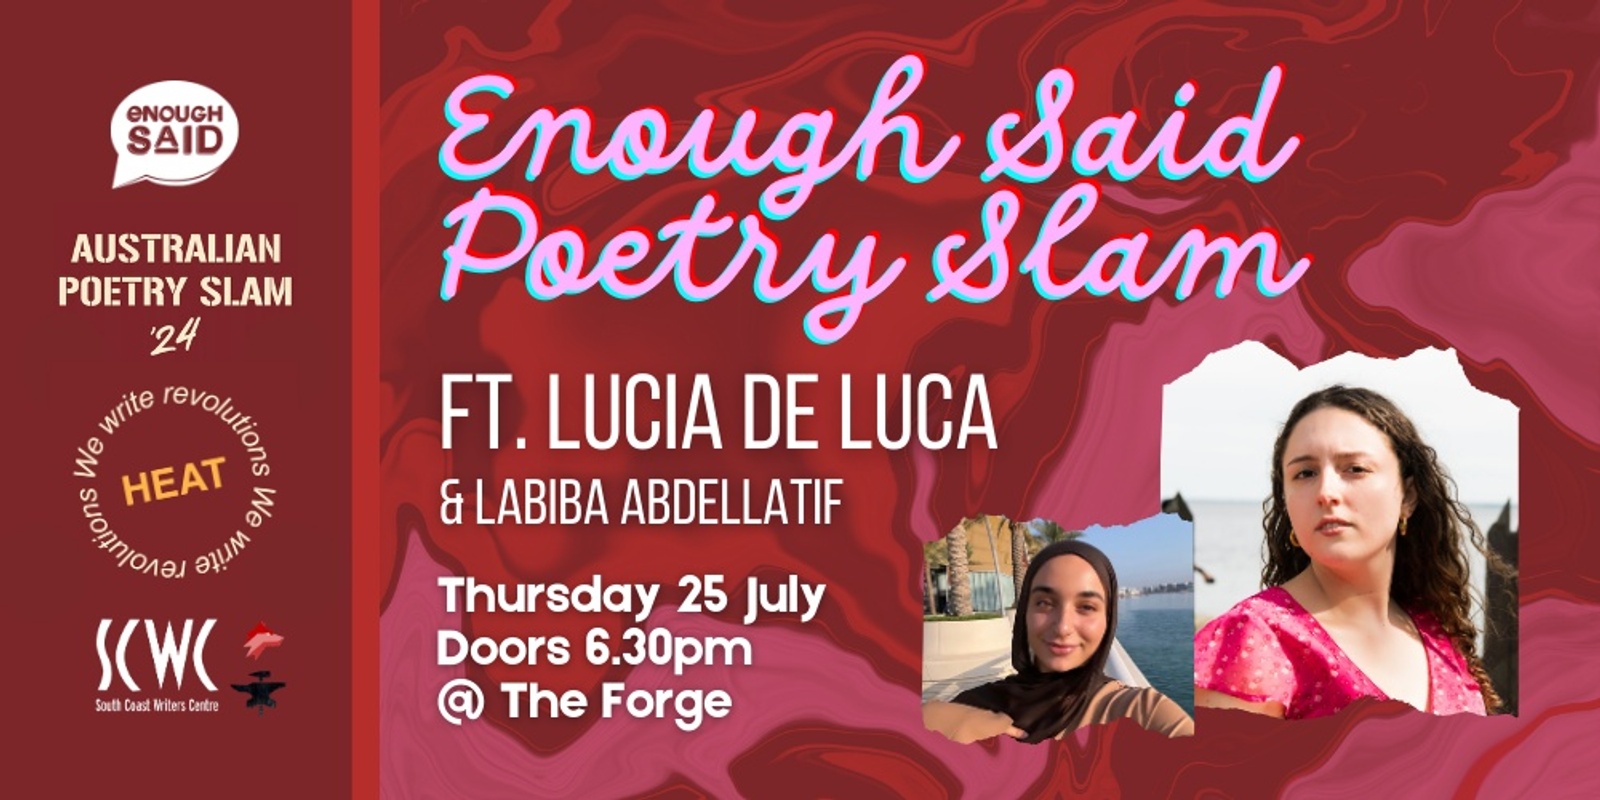 Banner image for Enough Said Poetry Slam ft. Lucia De Luca (APS Wollongong Heat)